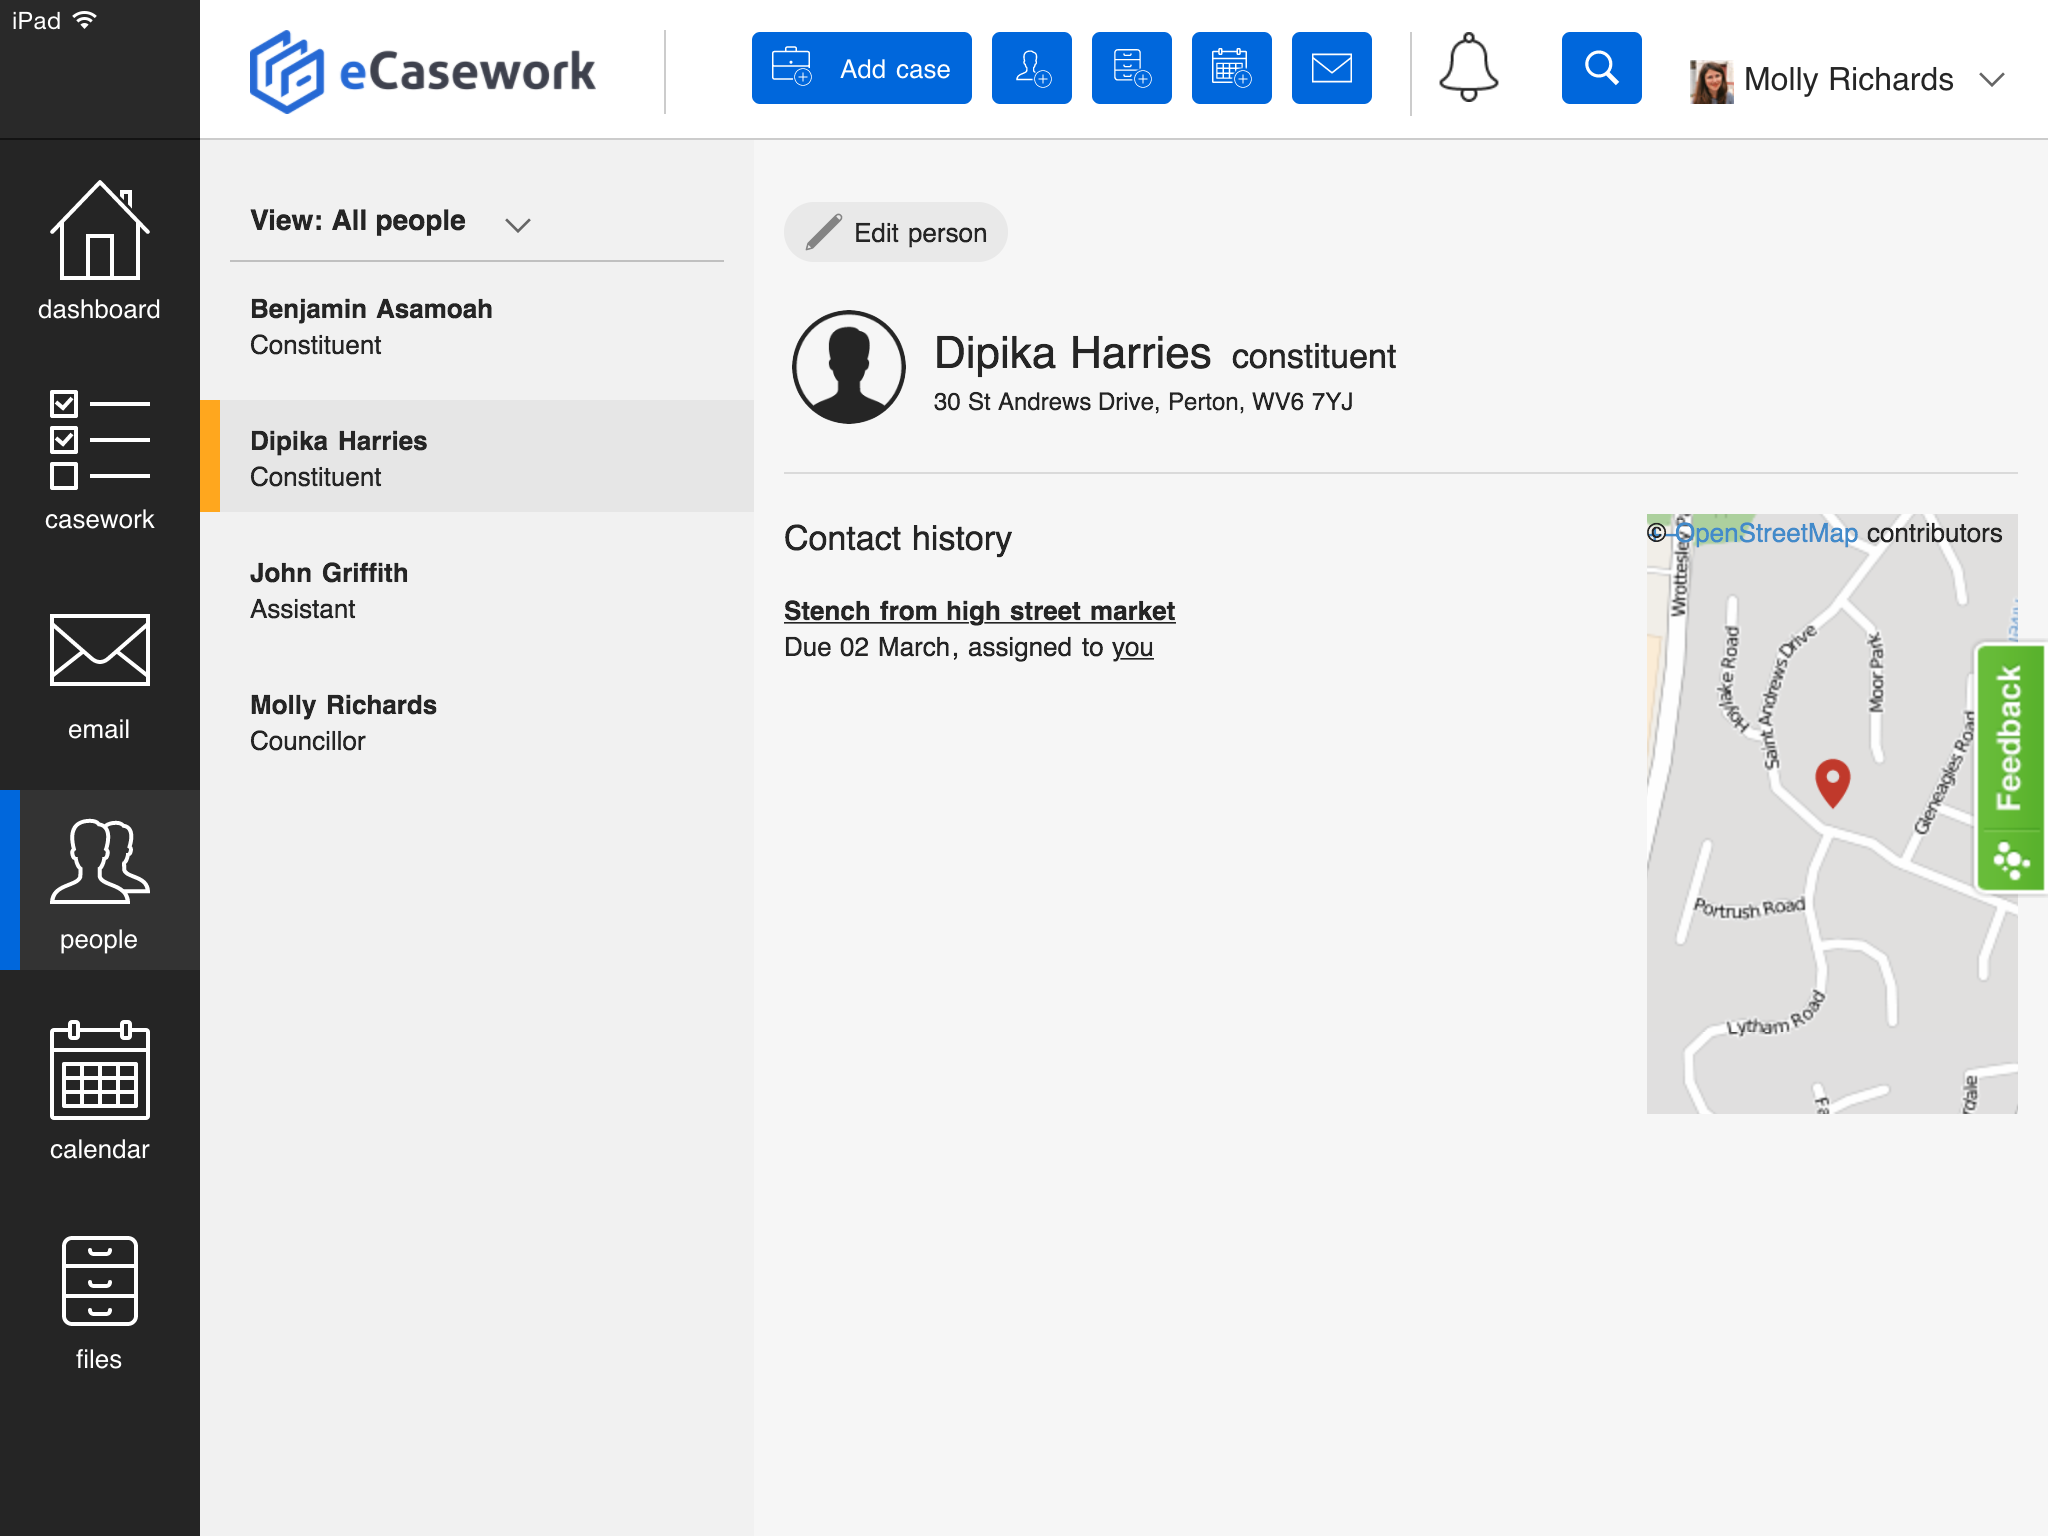 A screenshot of the eCasework people section